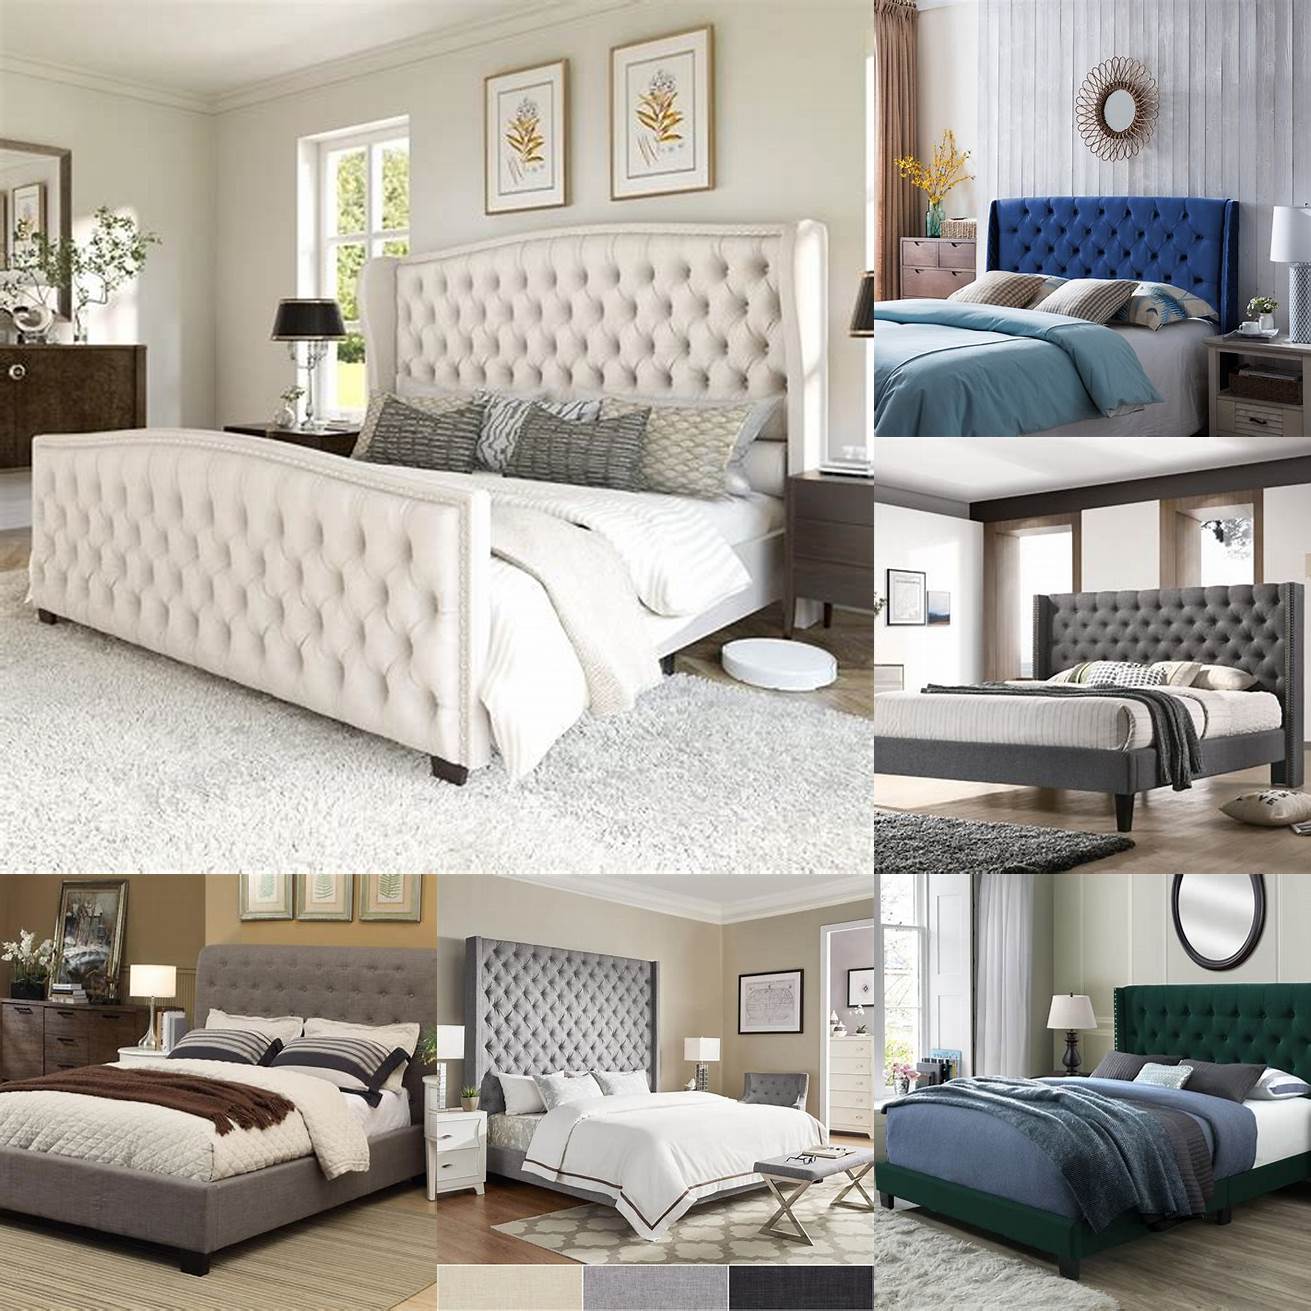 A queen bed platform with a tufted headboard